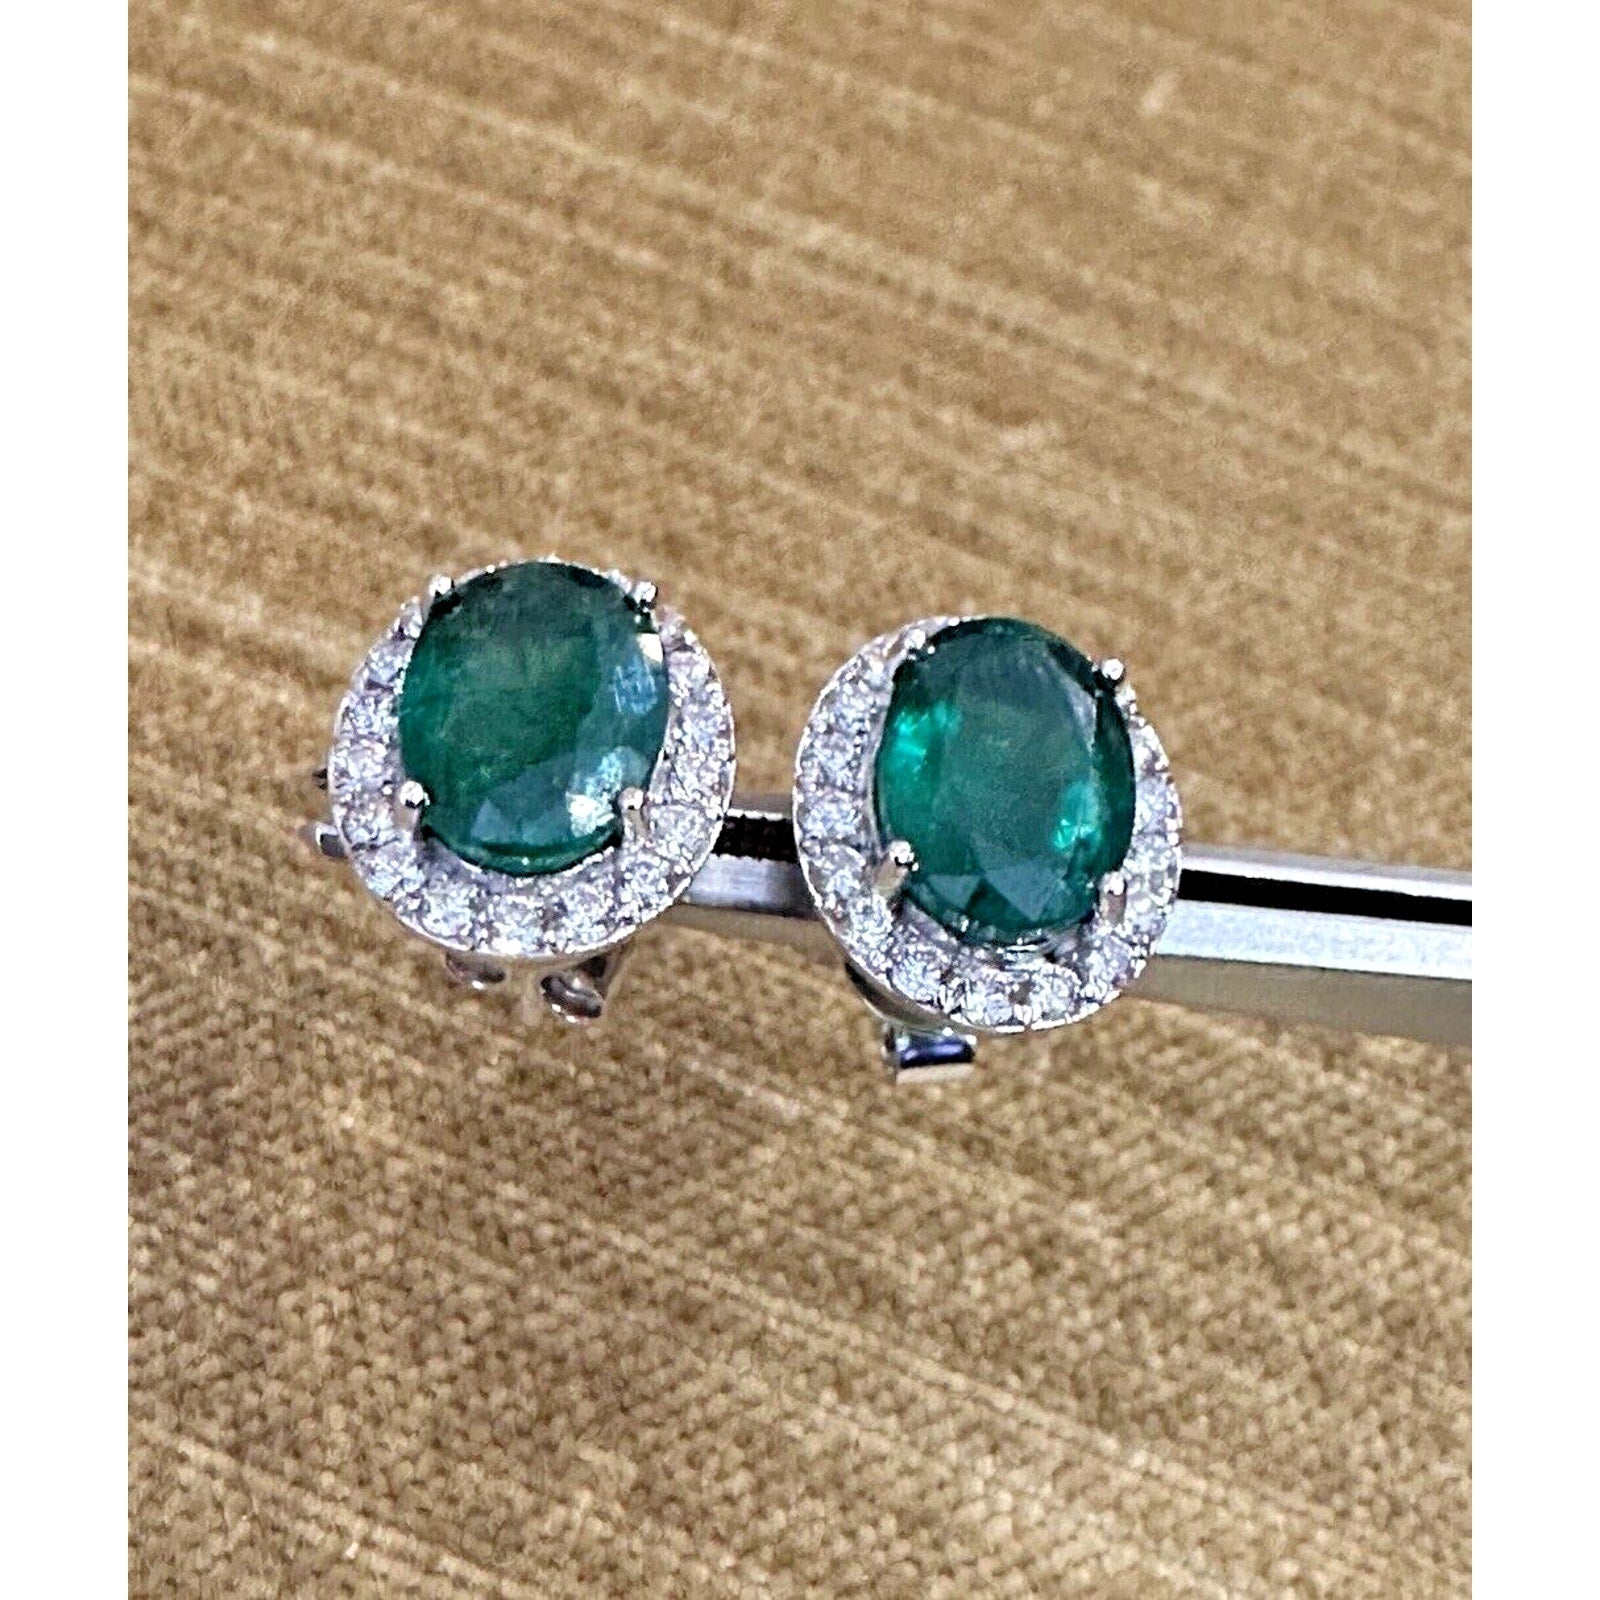 Natural Oval Emerald Stud Earrings with Diamond Halo in 14k White Gold